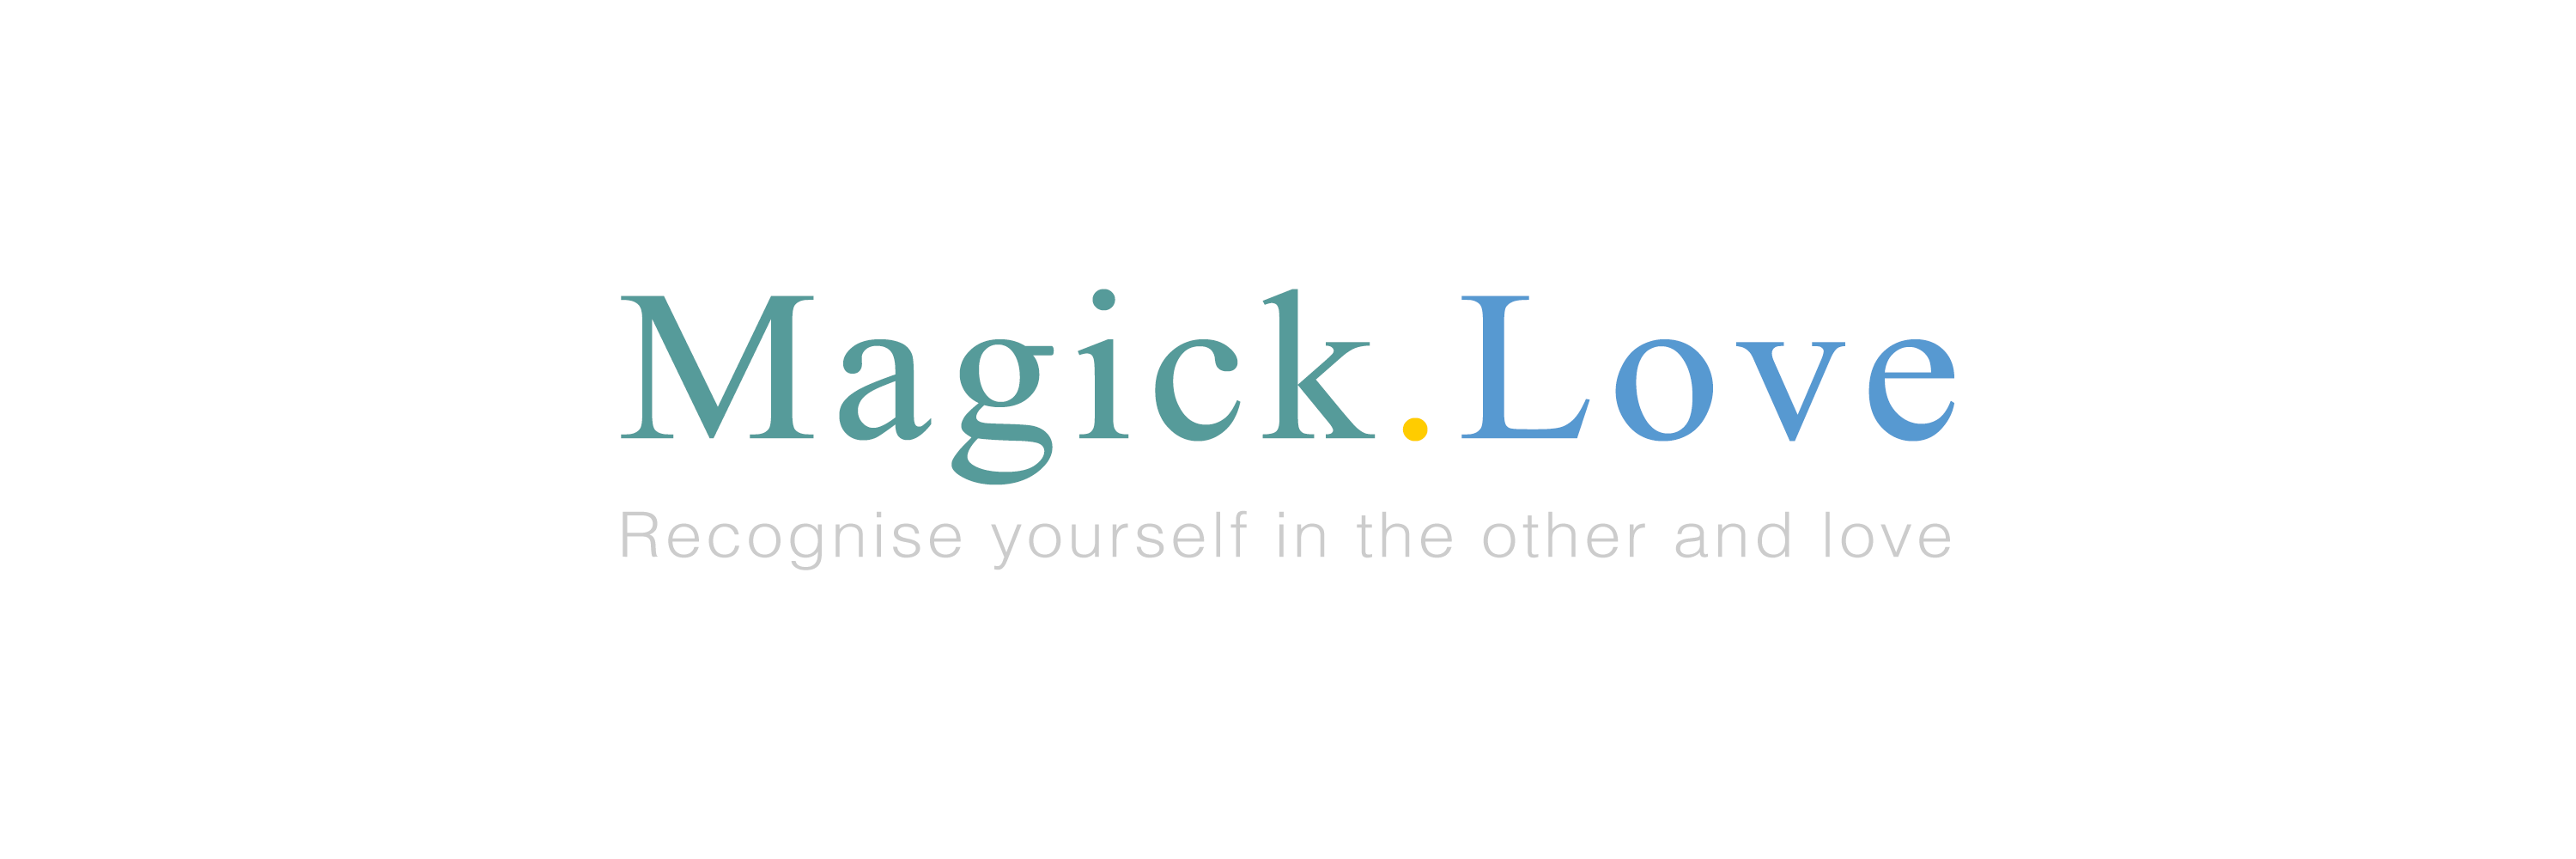 Magick.Love / startup from Berlin / Background